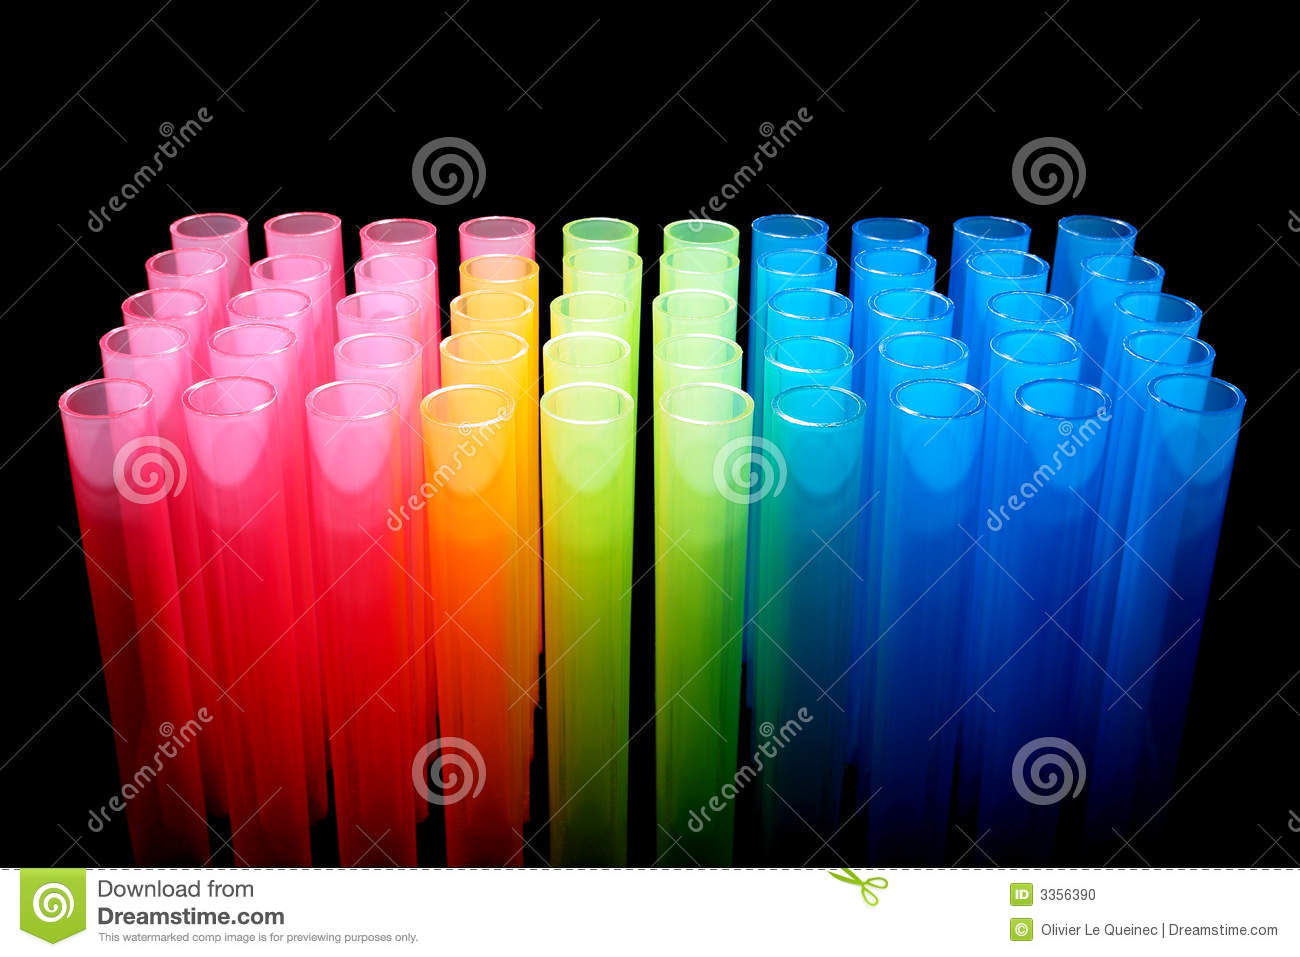 Laboratory Plastic Test Tubes In Rainbow Colors In A Science Research